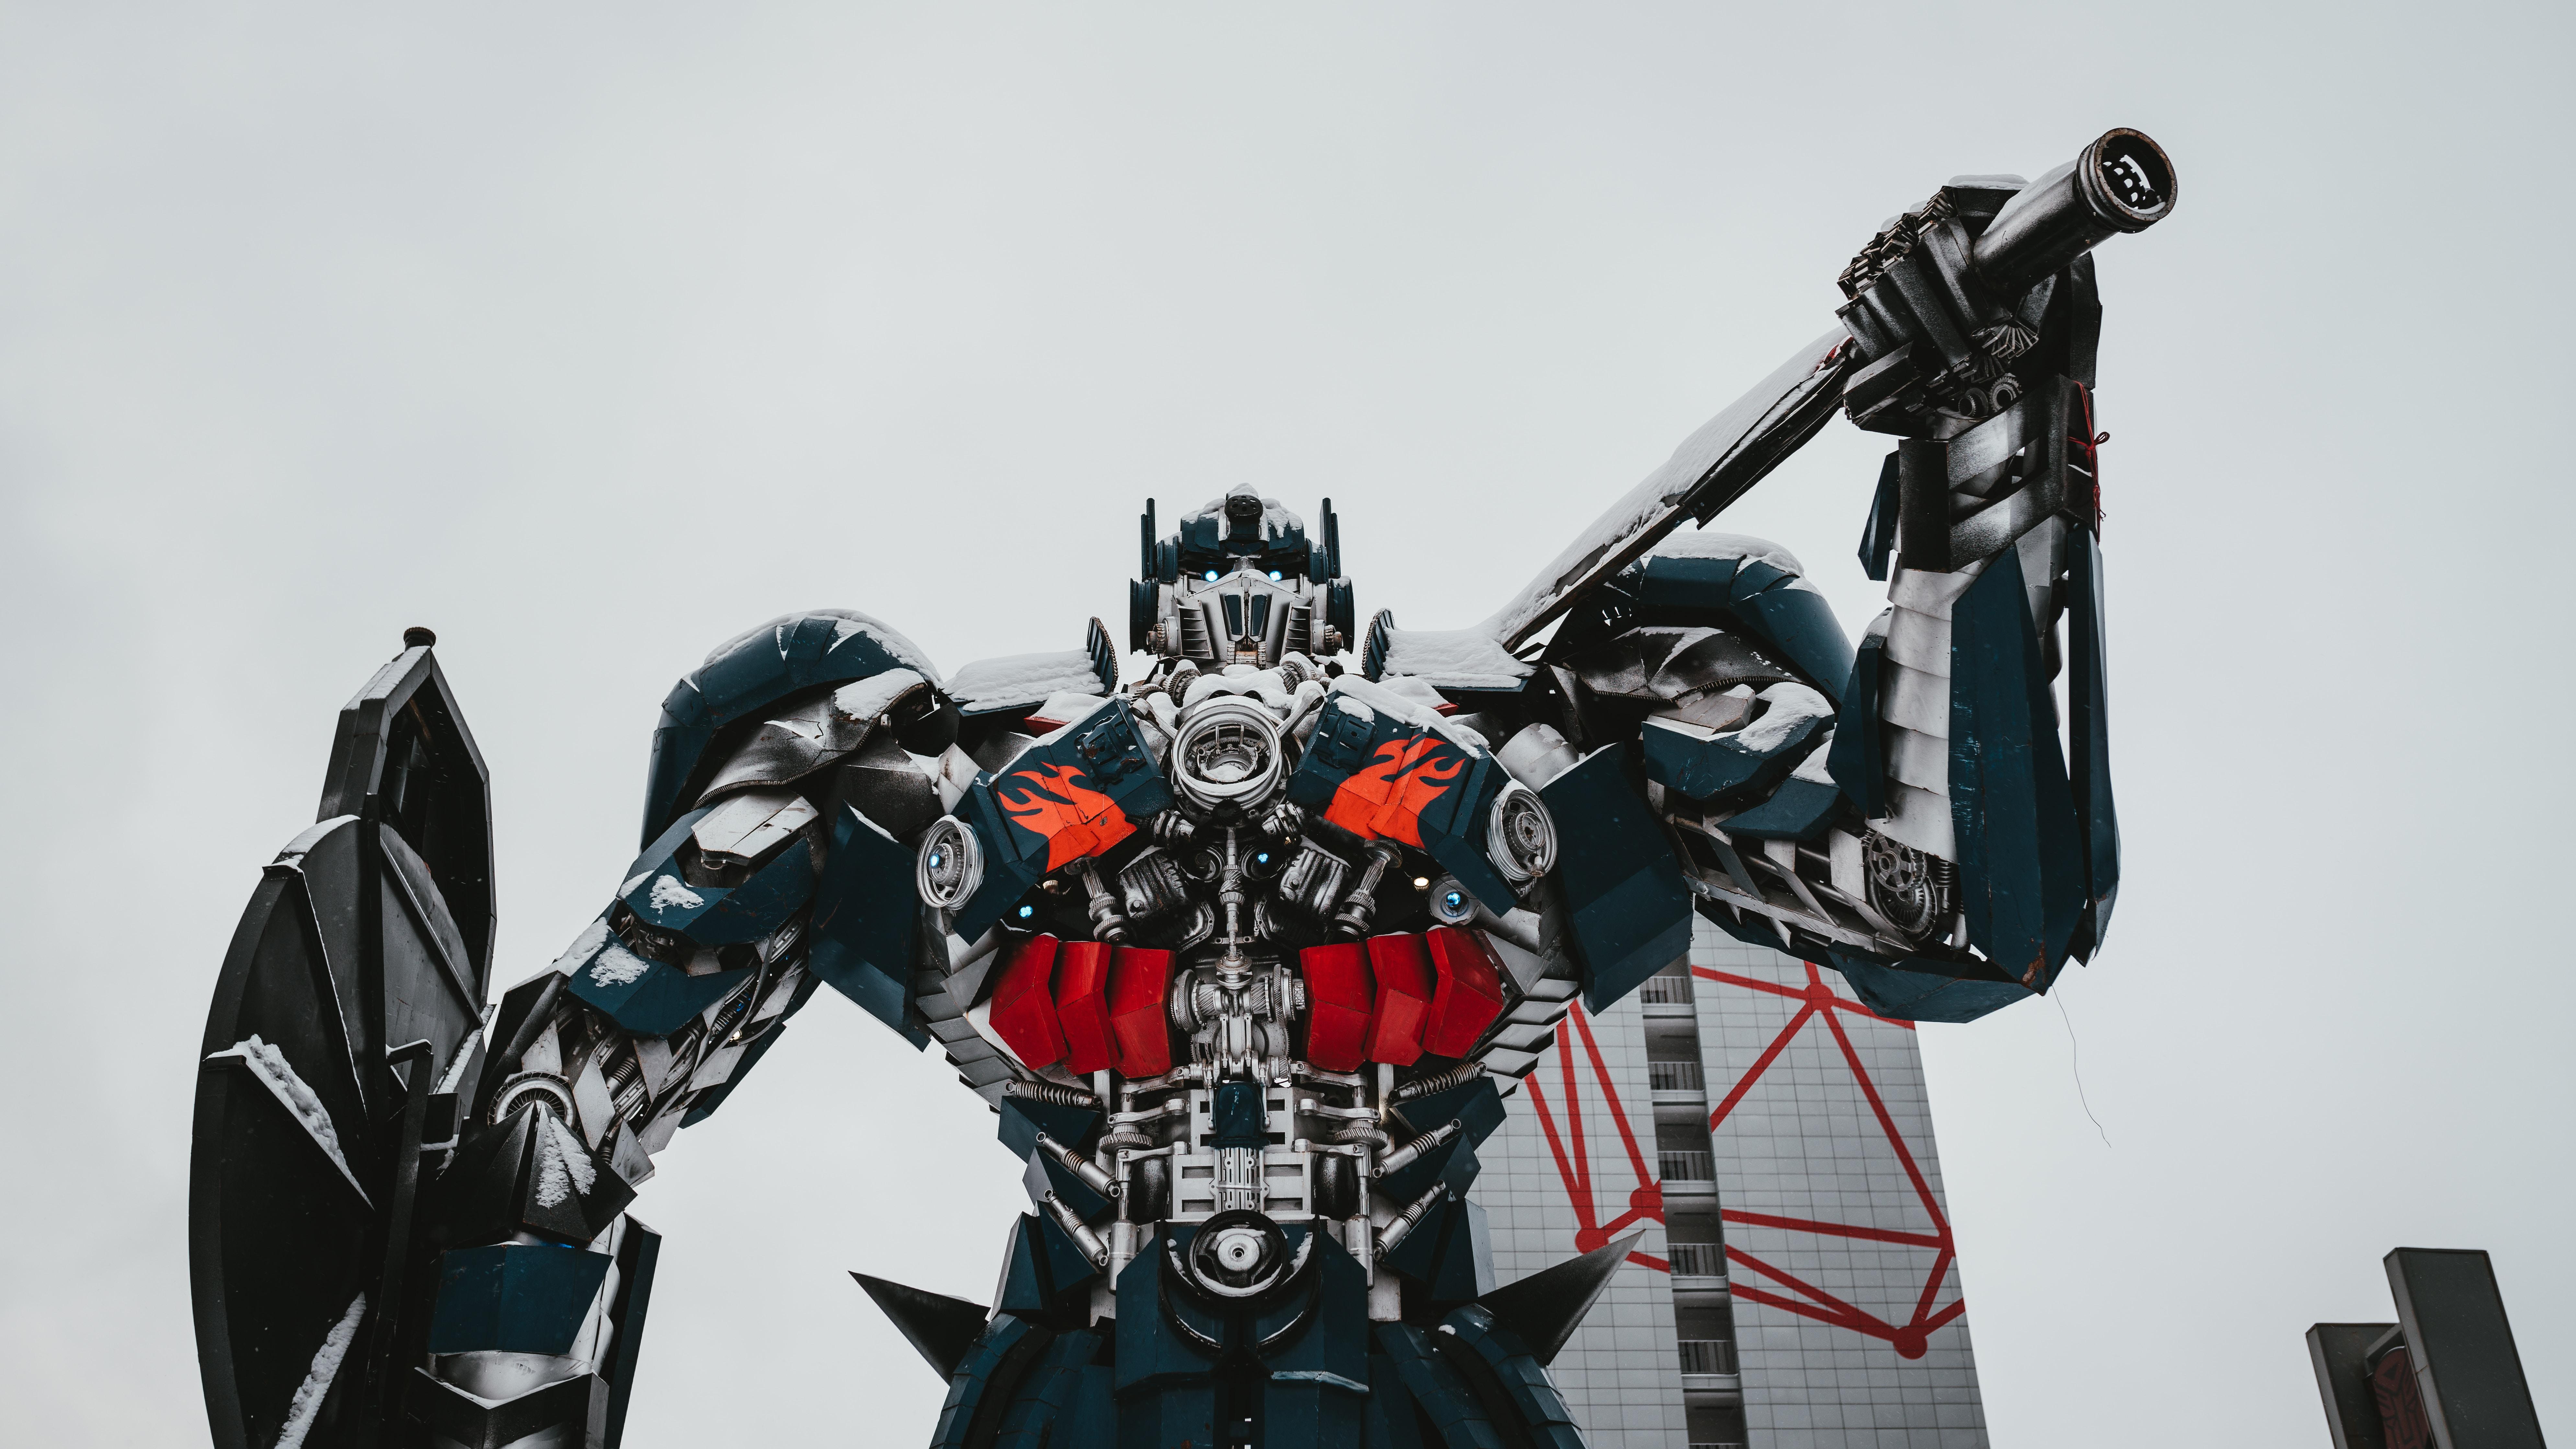 Transformer Picture. Download Free Image